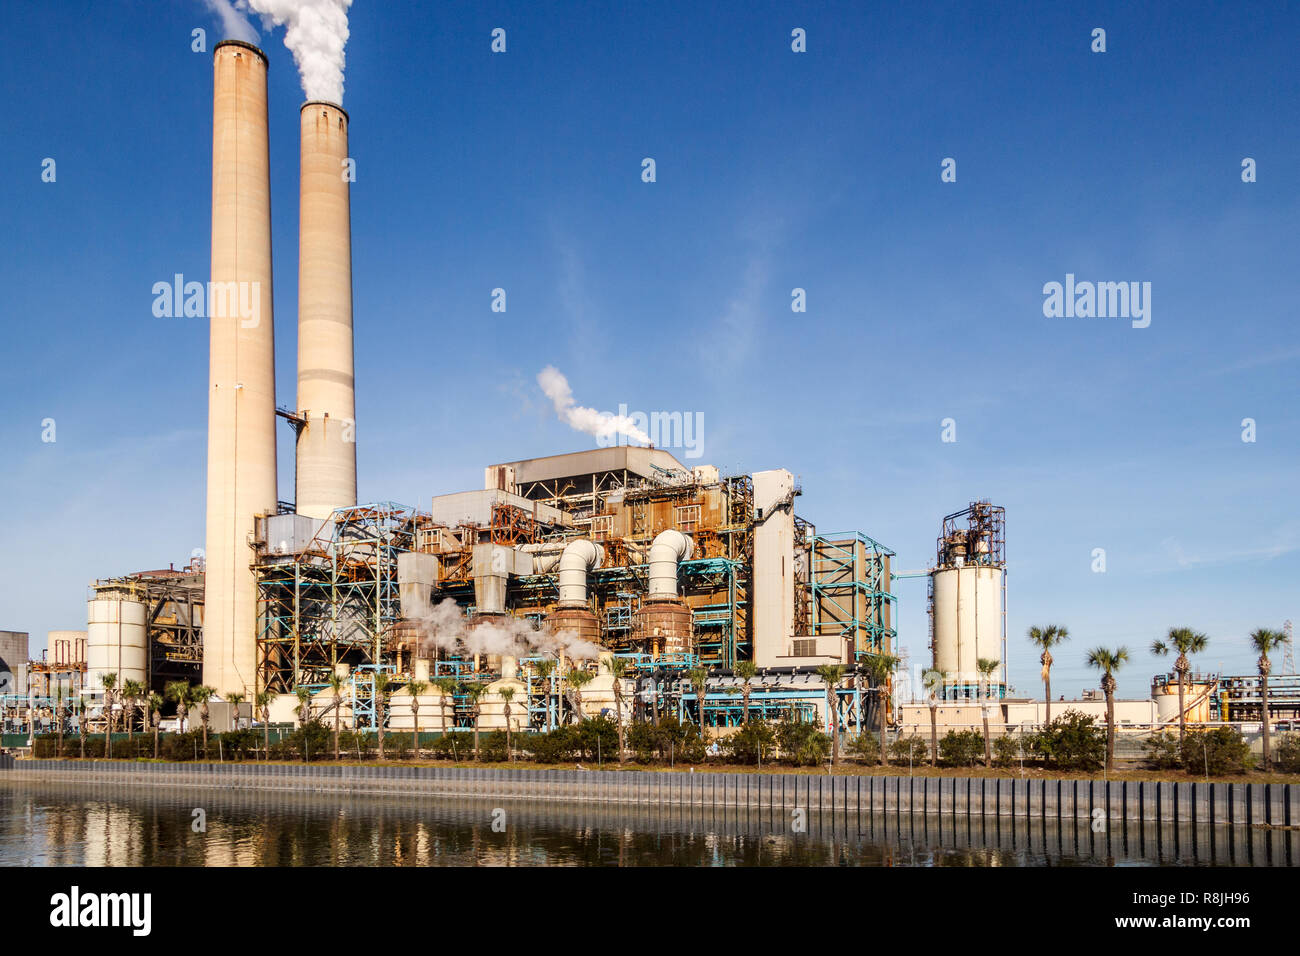 TECO Power plant with tall smoke stacks on a coastal plain. There is a manatee preserve and viewing center surrounding the plant. Stock Photo